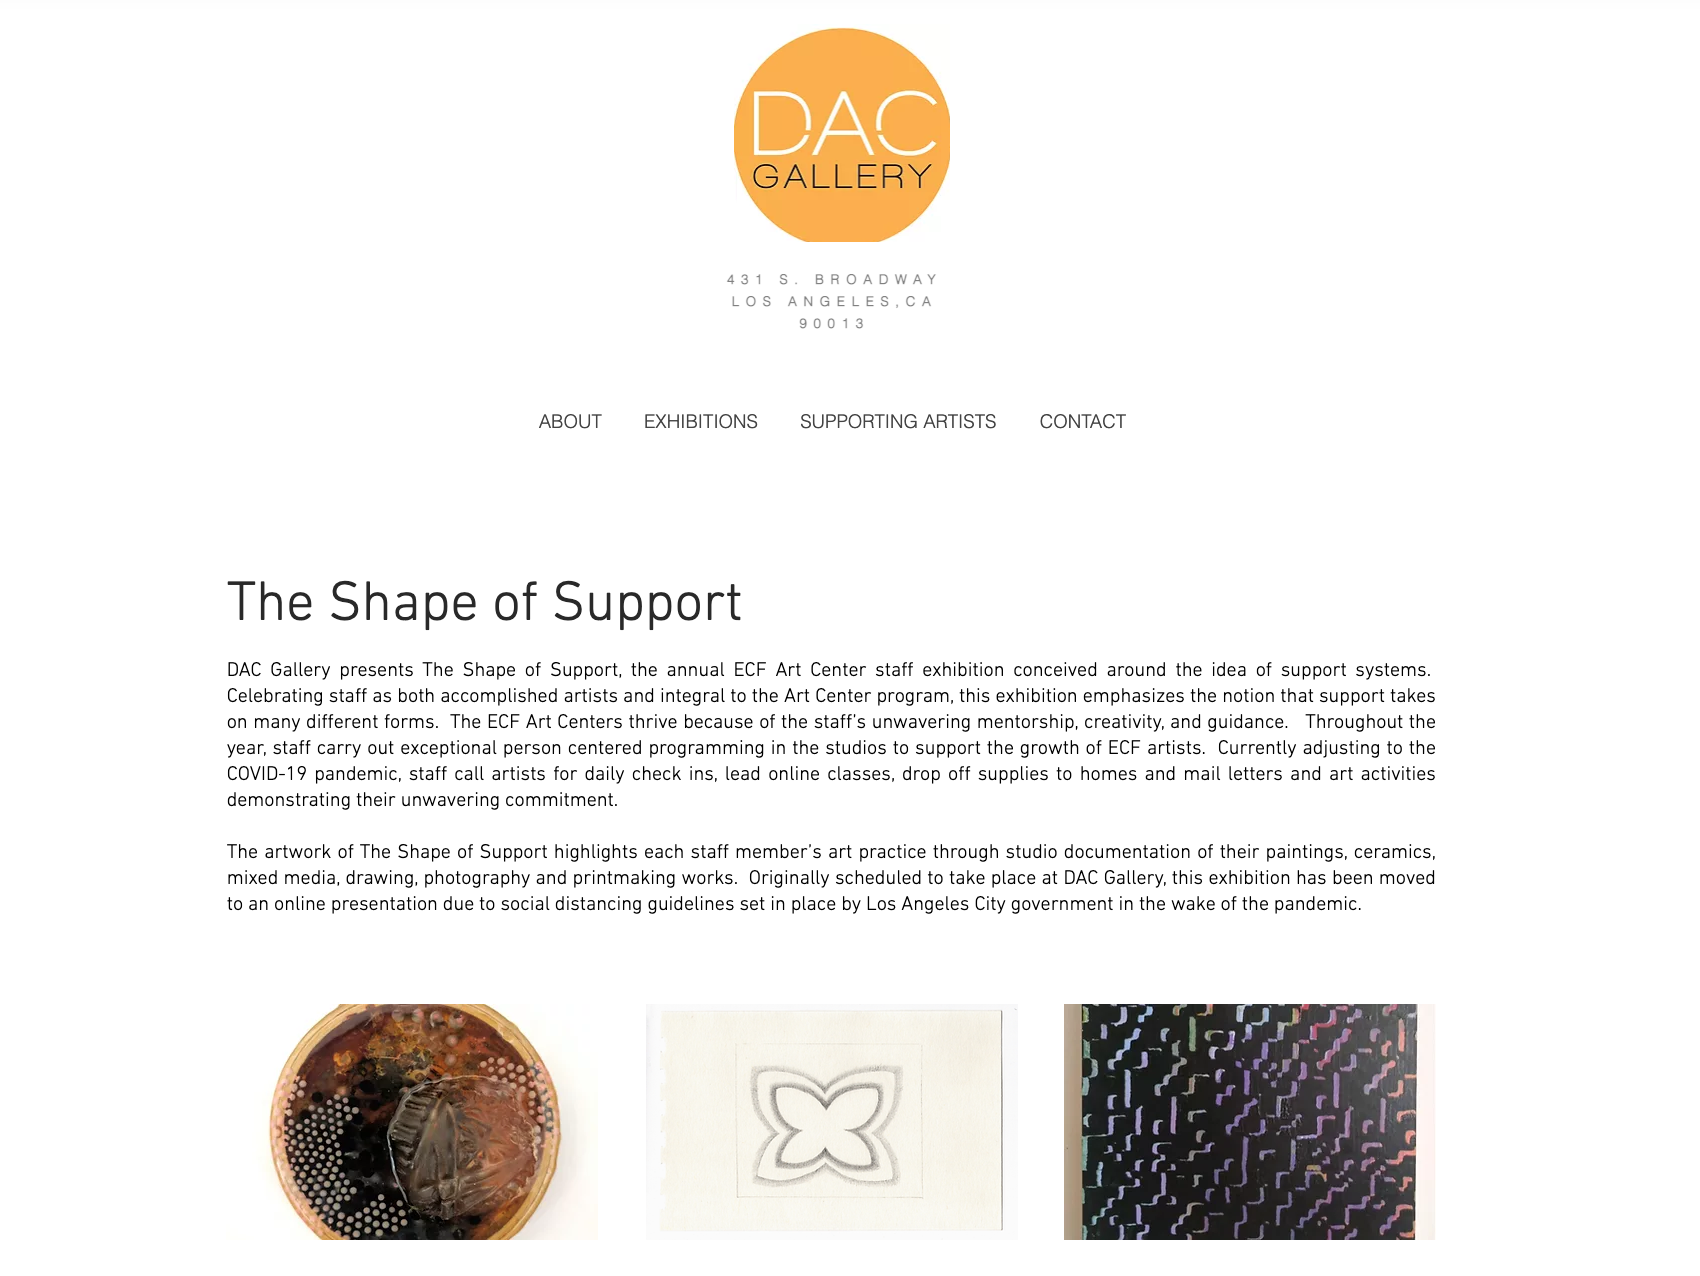 The Shape of Support: Online Exhibition